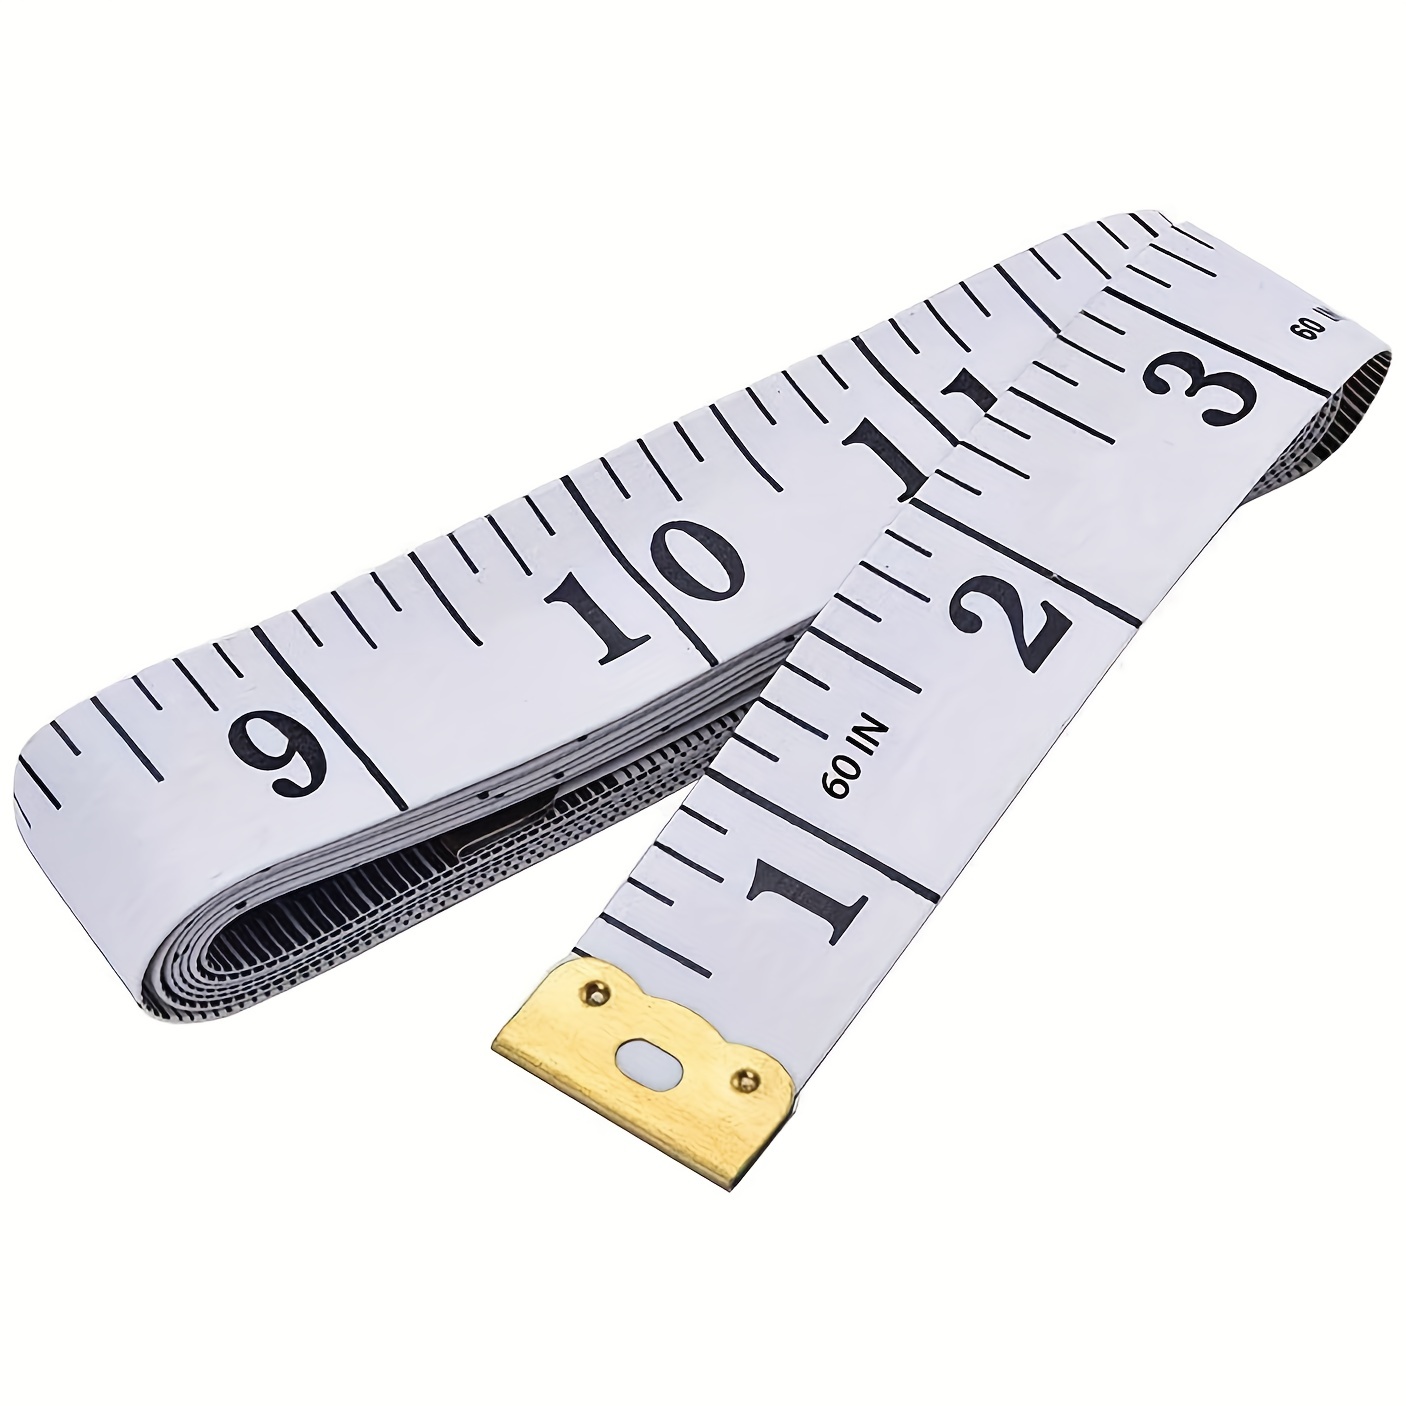  Perfect Body Tape Measure - 80 Inch Automatic Telescopic Tape  Measure - Retractable Measuring Tape for Body: Waist, Hip, Bust, Arms, and  More (Green - 80 inch) : Tools & Home Improvement